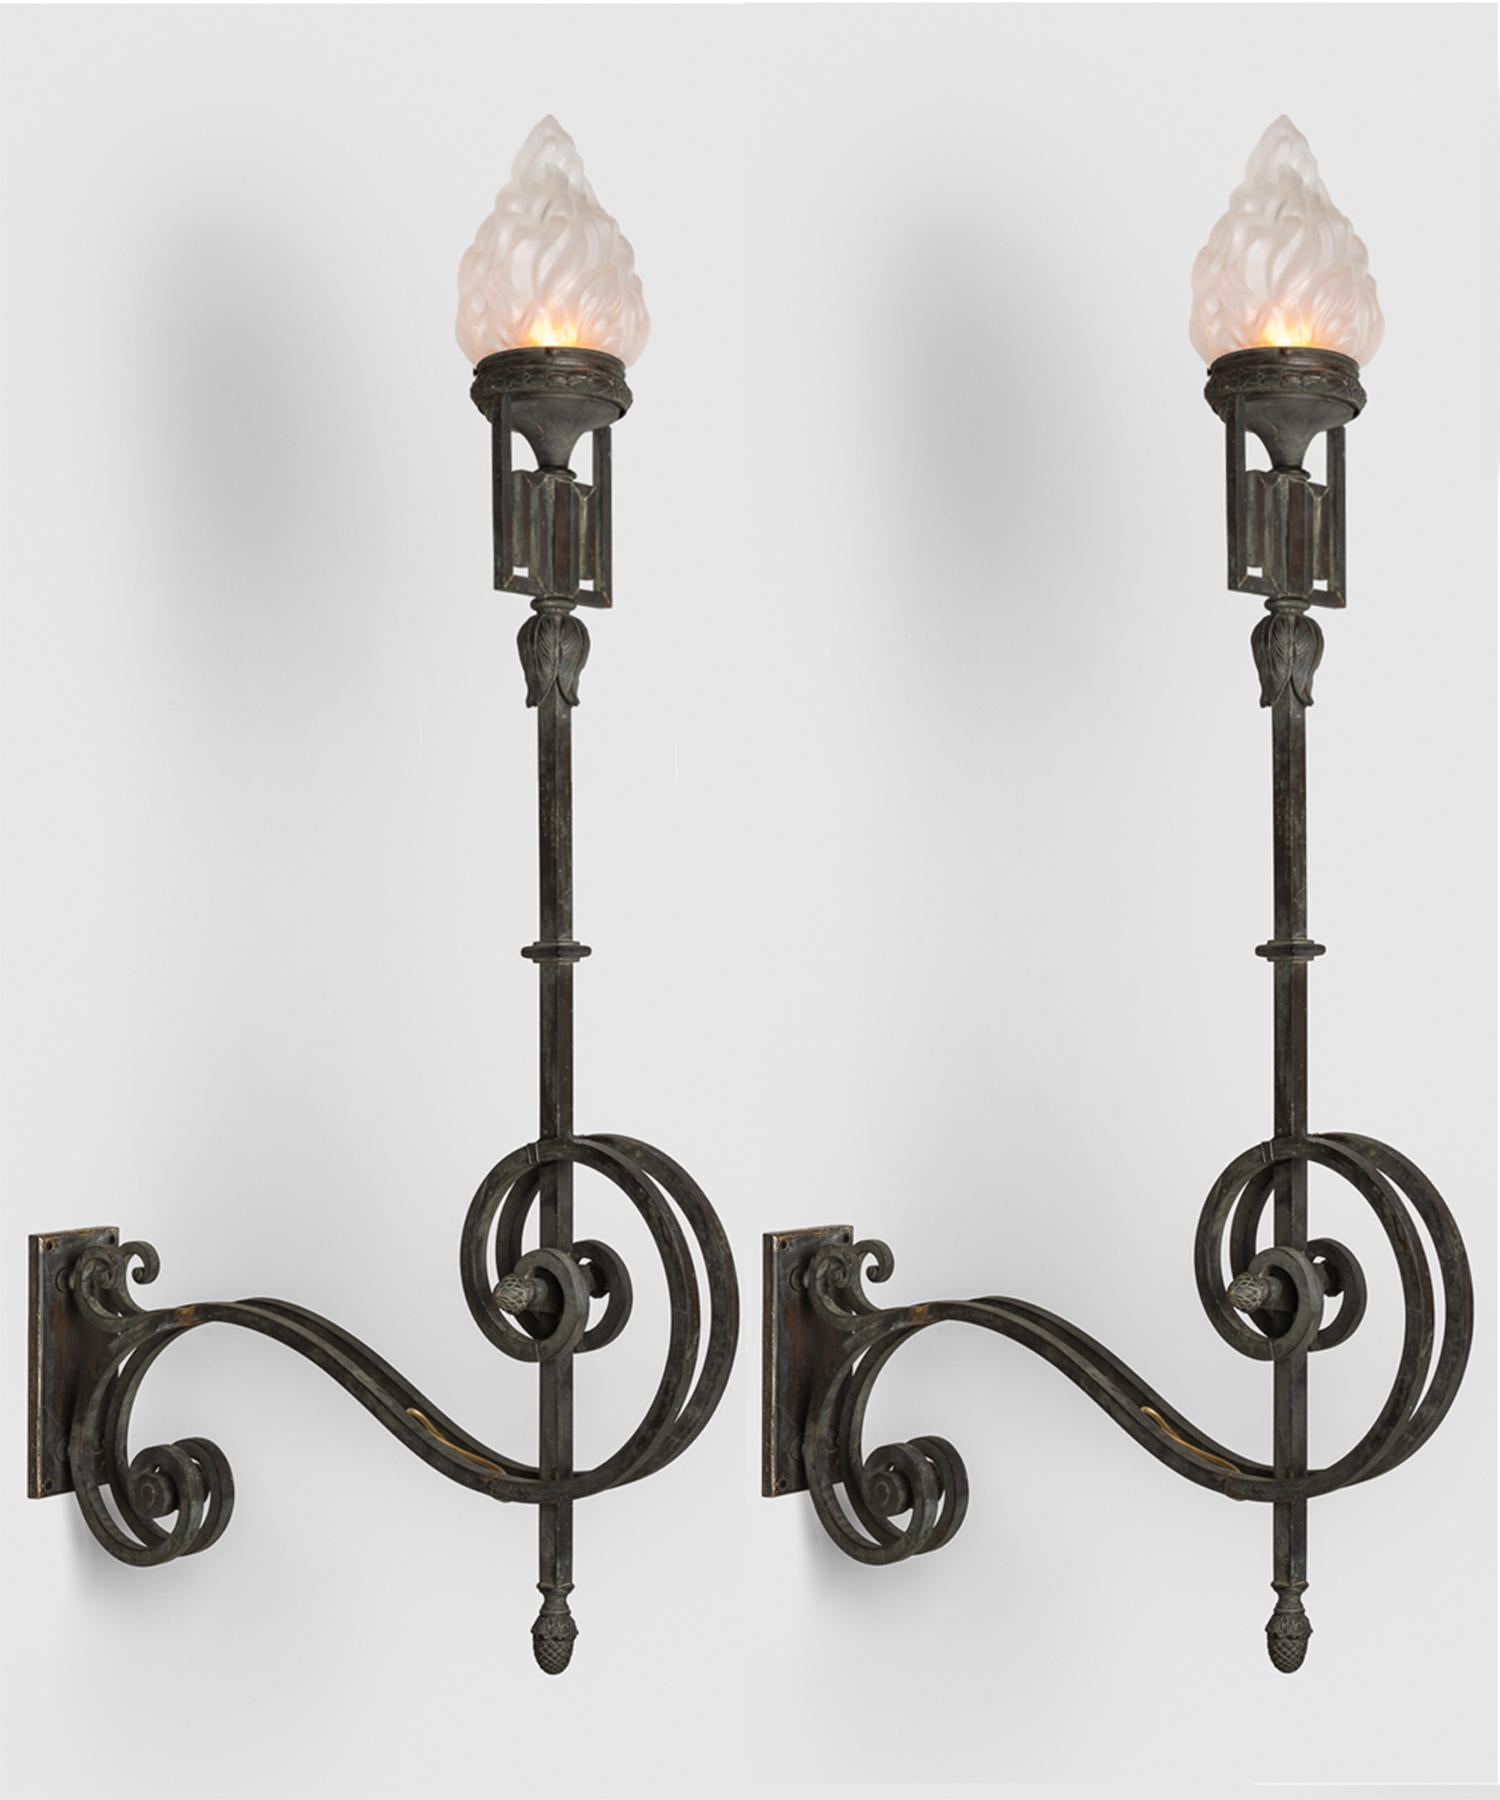 Verdigris bronze wall torch, circa 1880.

Large scale wall light with ornate arm and flame shade.